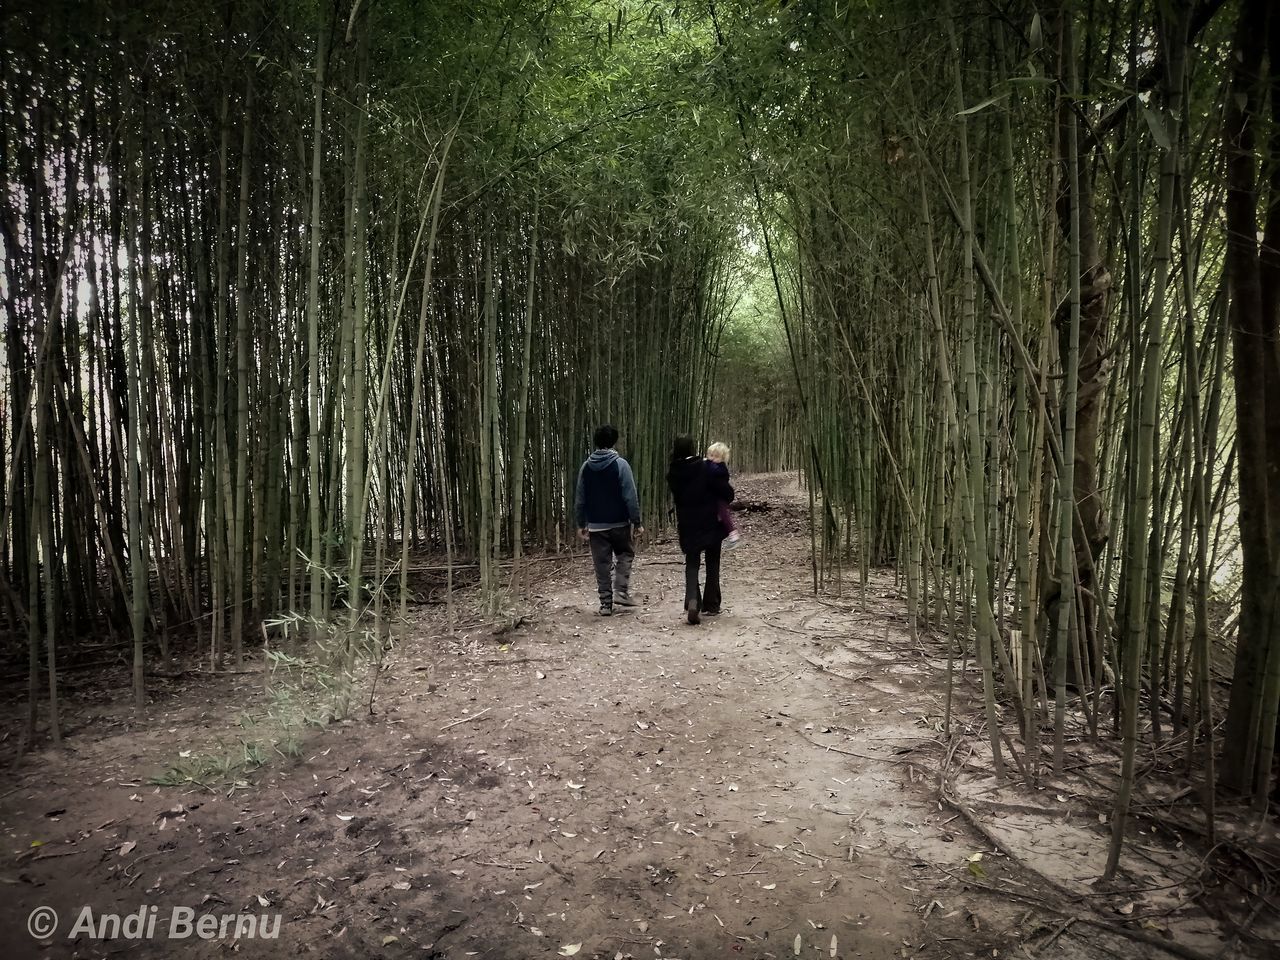 forest, tree, rear view, plant, walking, land, nature, direction, togetherness, growth, men, people, women, leisure activity, positive emotion, woodland, adult, the way forward, group of people, couple - relationship, outdoors, bamboo - plant